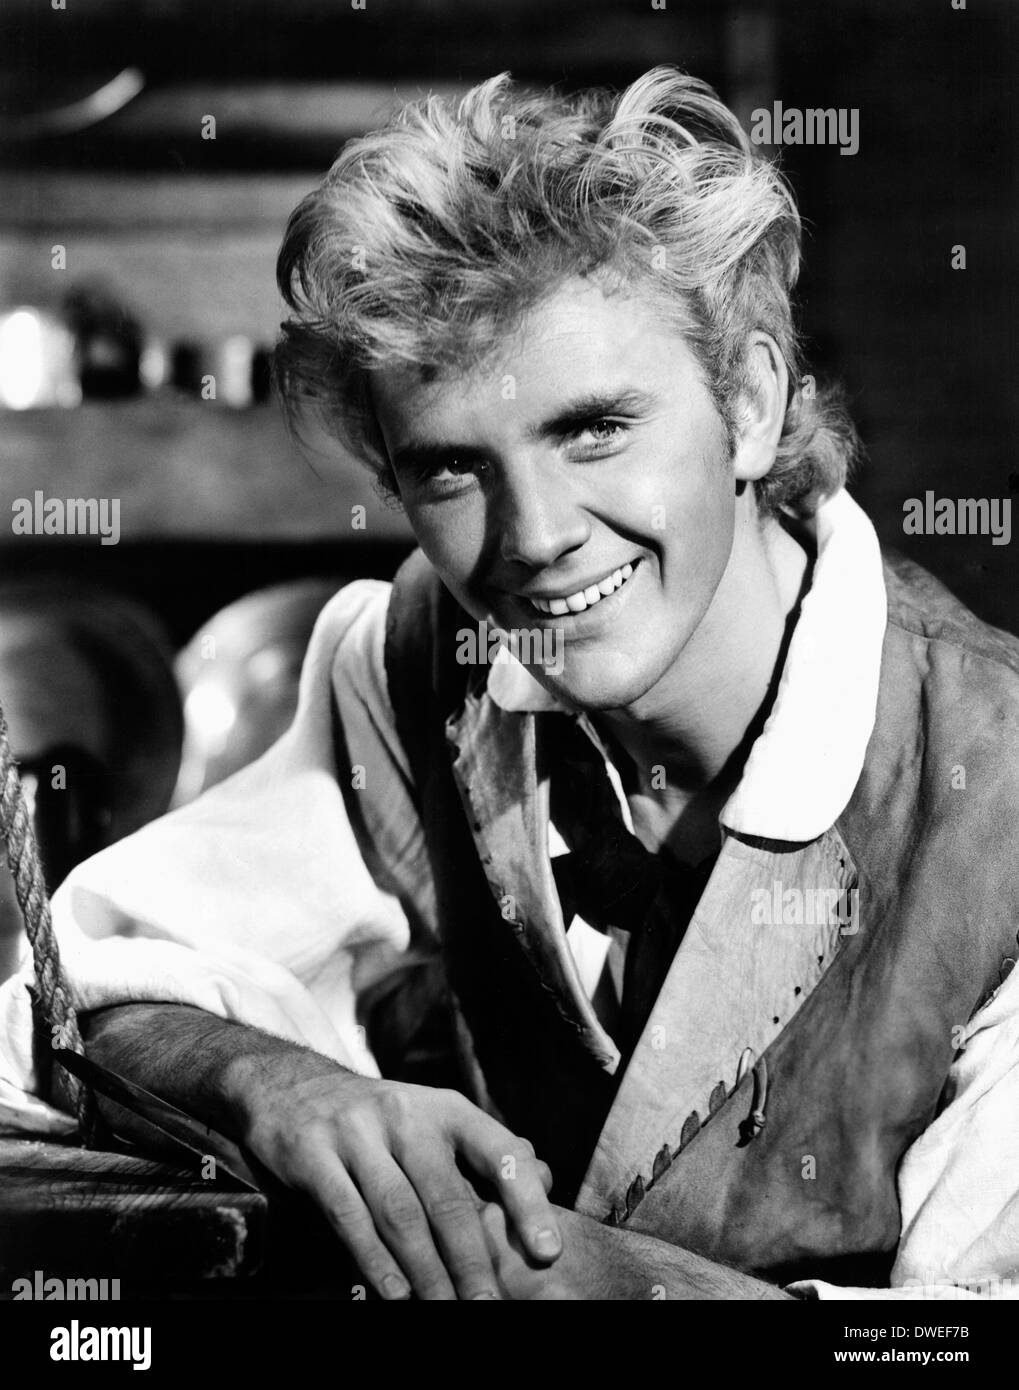 Terence Stamp, on-set of the Film, 'Billy Budd' directed by Peter Ustinov, 1962 Stock Photo